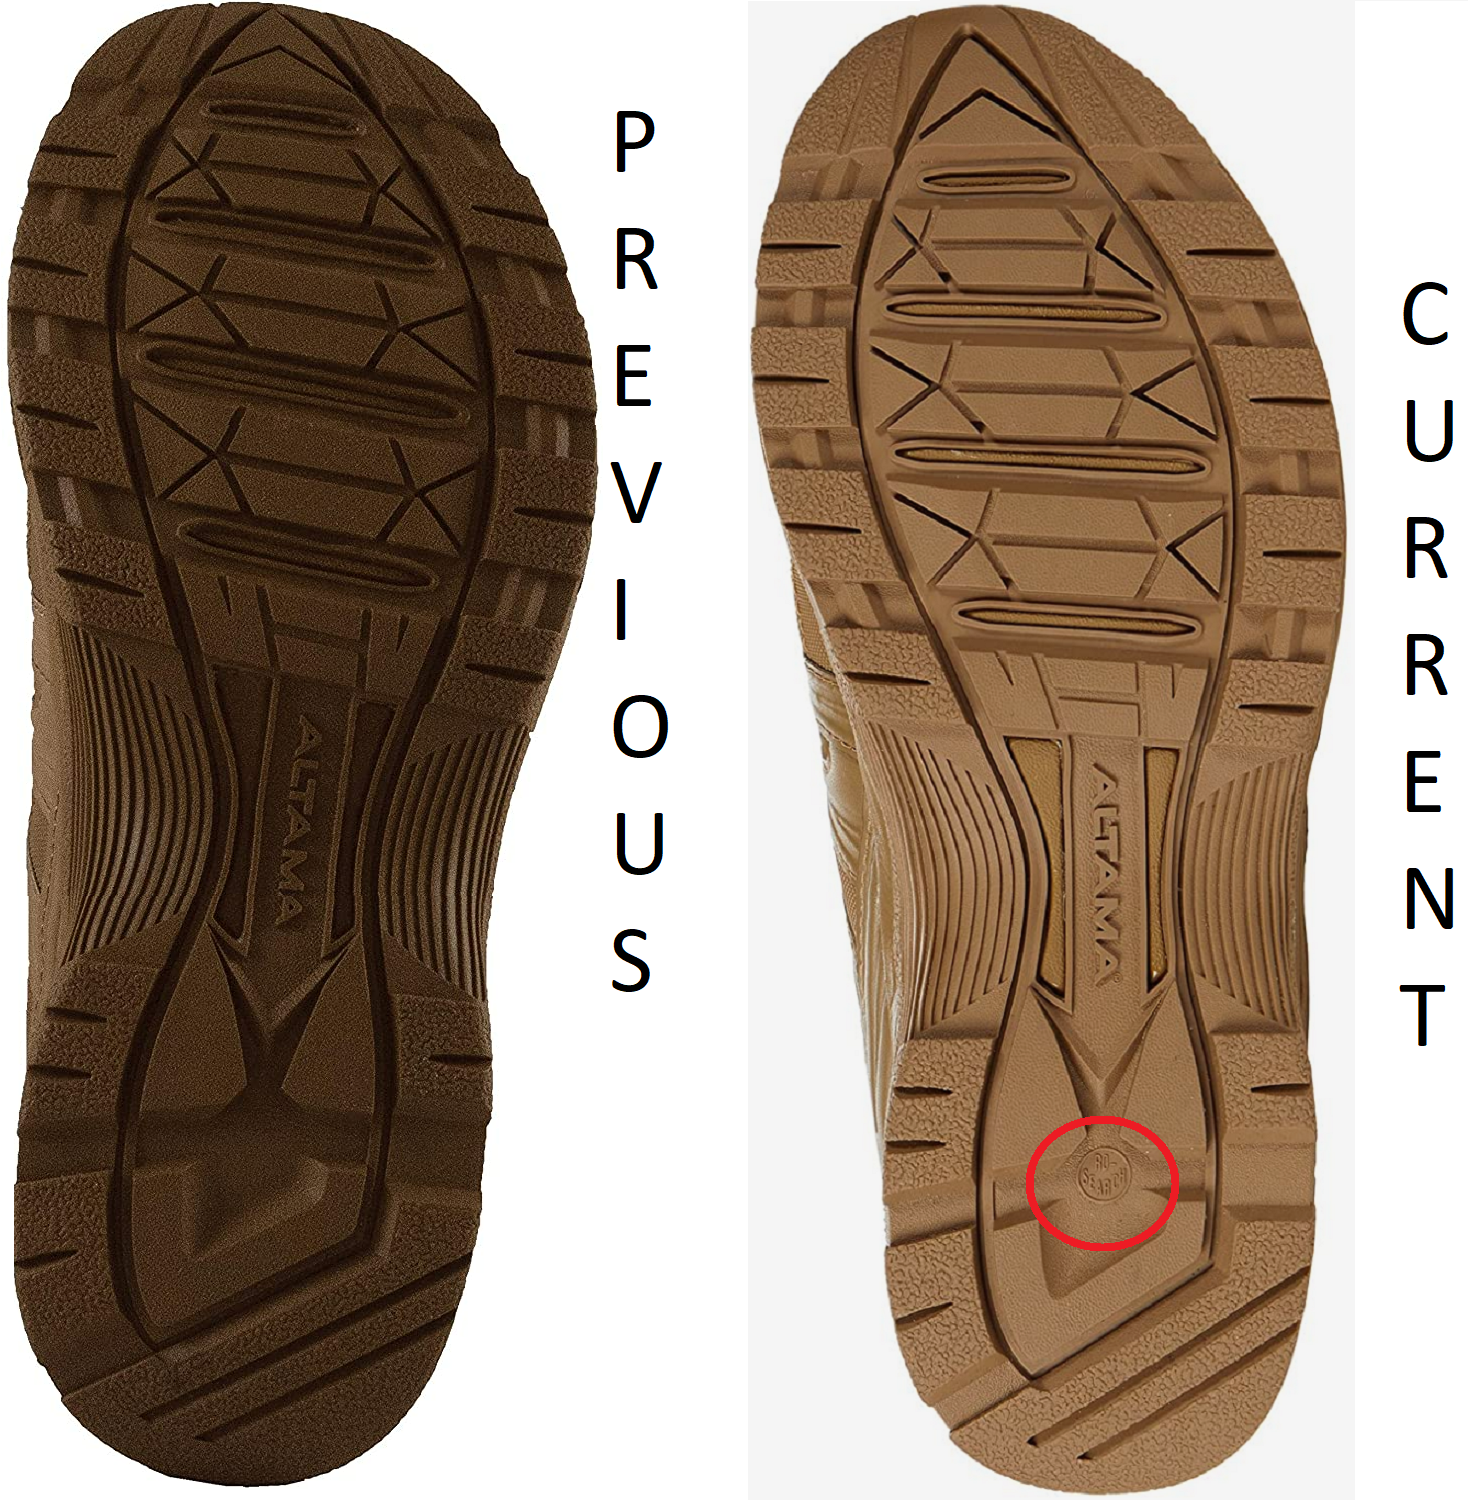 Aboottabad_Mid Sole Comparison